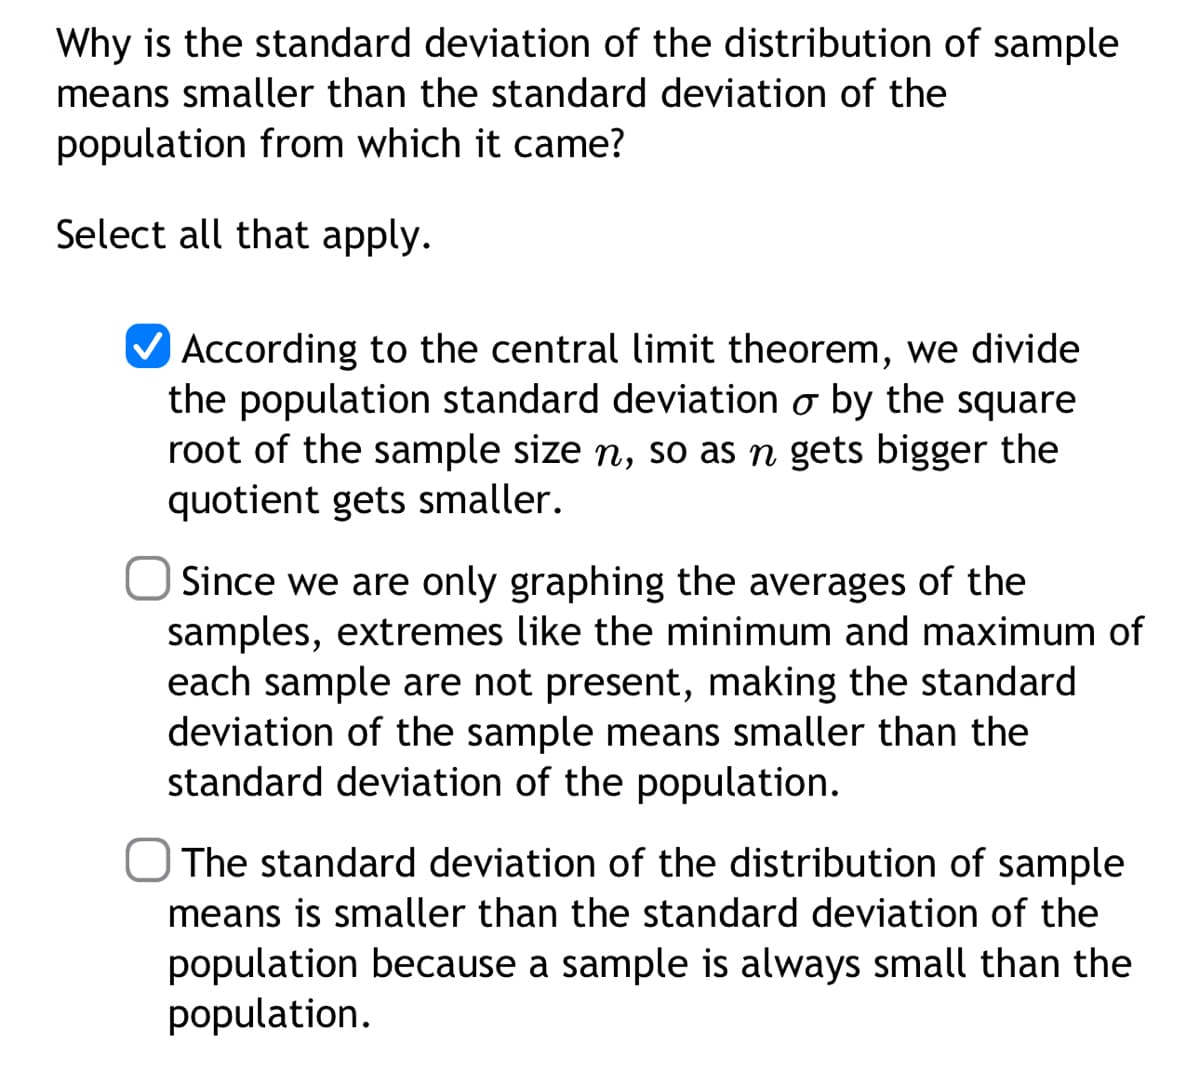 Why is the standard deviation of the distribution of sample
means smaller than the standard deviation of the
population from which it came?
Select all that apply.
According to the central limit theorem, we divide
the population standard deviation o by the square
root of the sample size n, so as n gets bigger the
quotient gets smaller.
Since we are only graphing the averages of the
samples, extremes like the minimum and maximum of
each sample are not present, making the standard
deviation of the sample means smaller than the
standard deviation of the population.
The standard deviation of the distribution of sample
means is smaller than the standard deviation of the
population because a sample is always small than the
population.